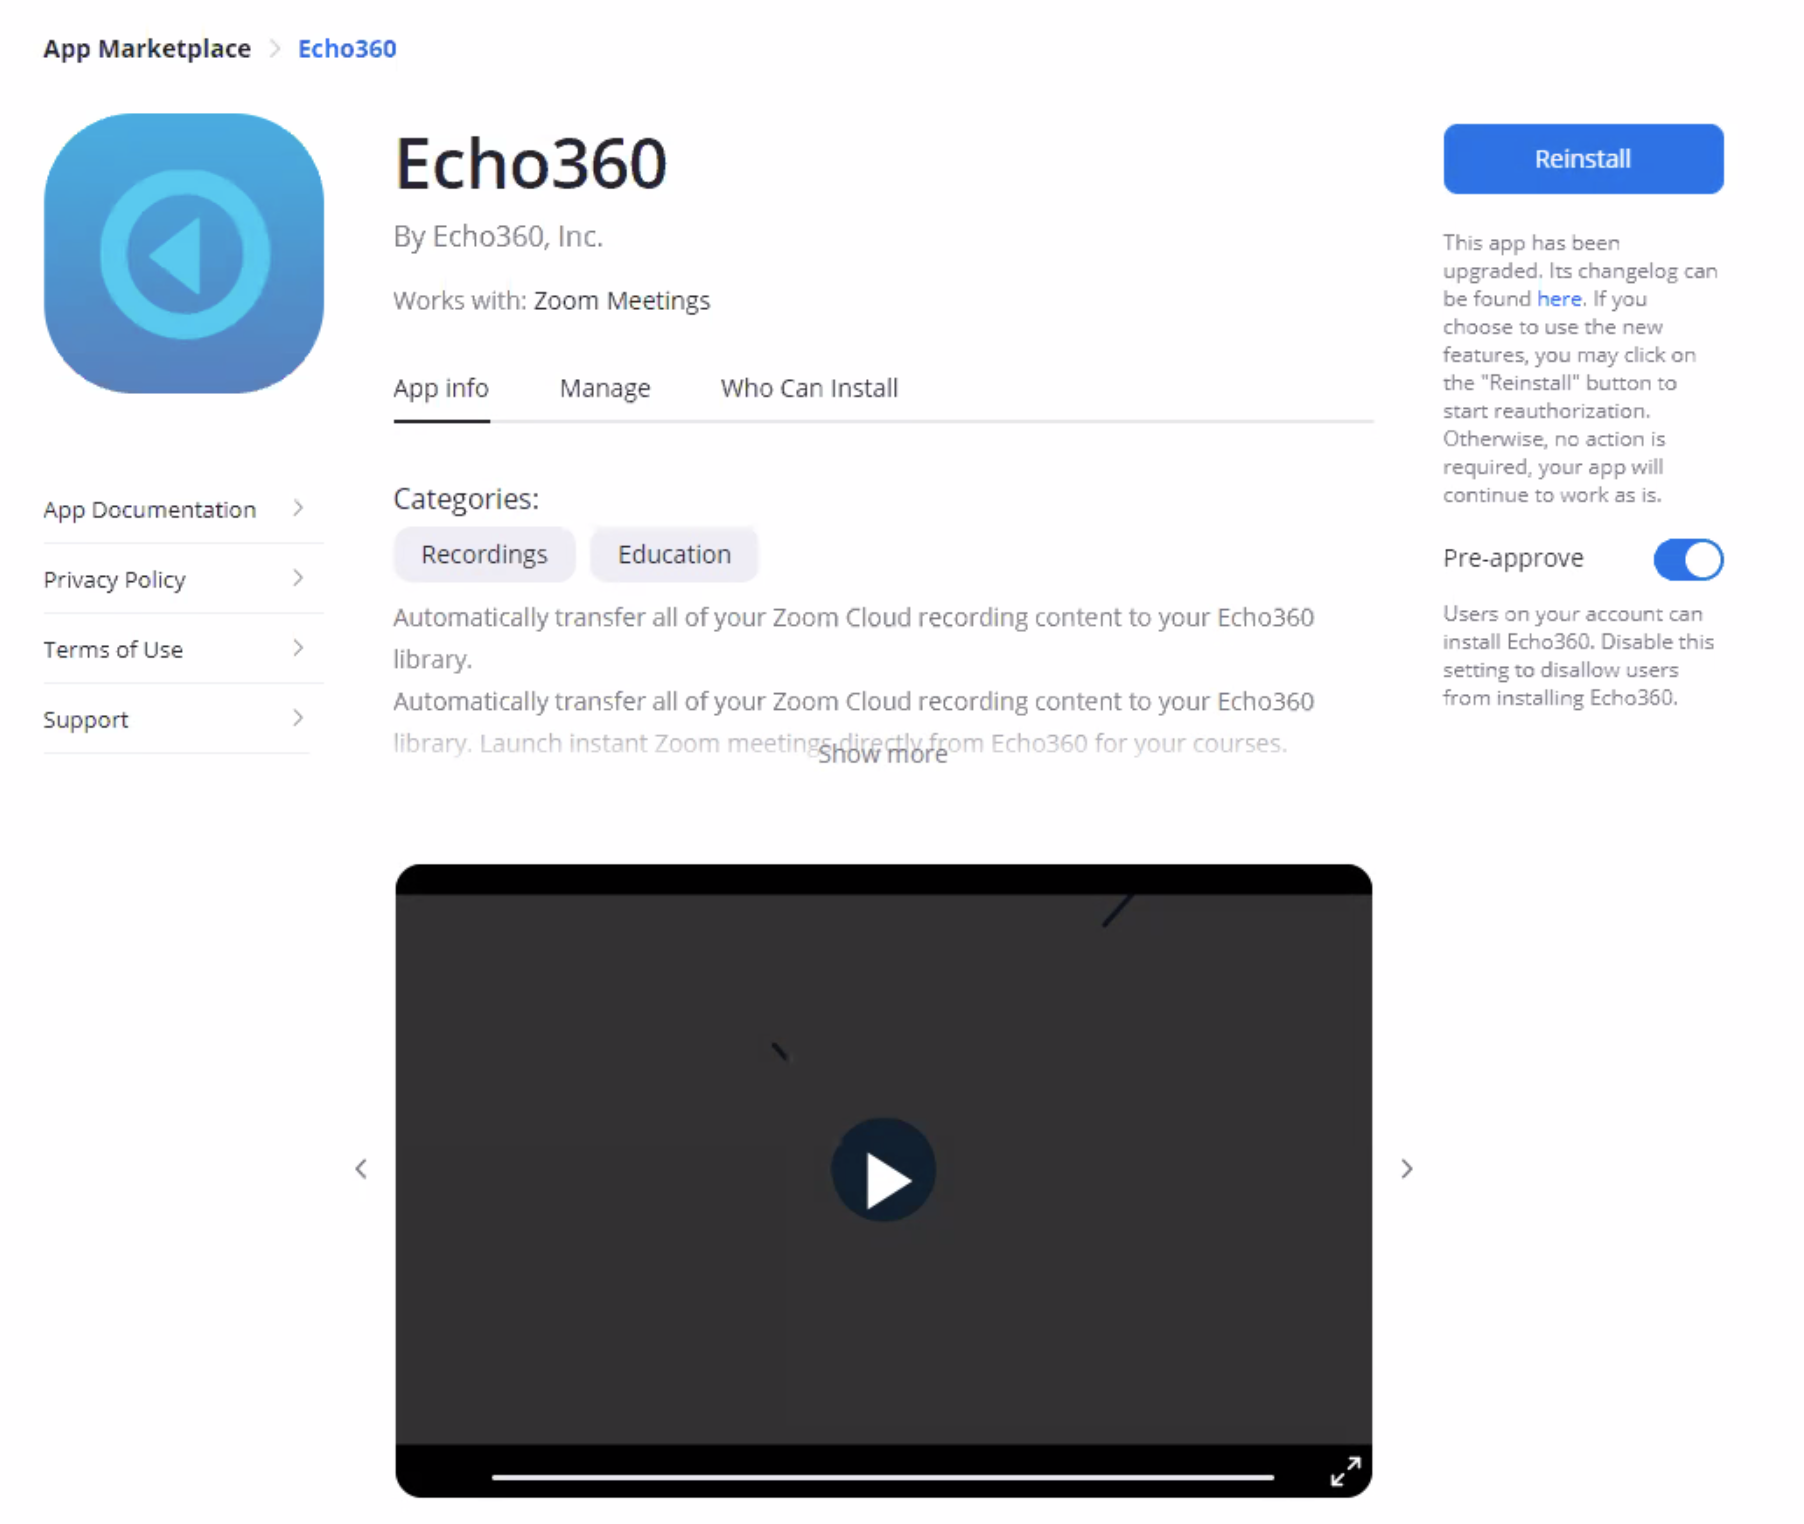 Echo360 app in Zoom account with reinstall button as described